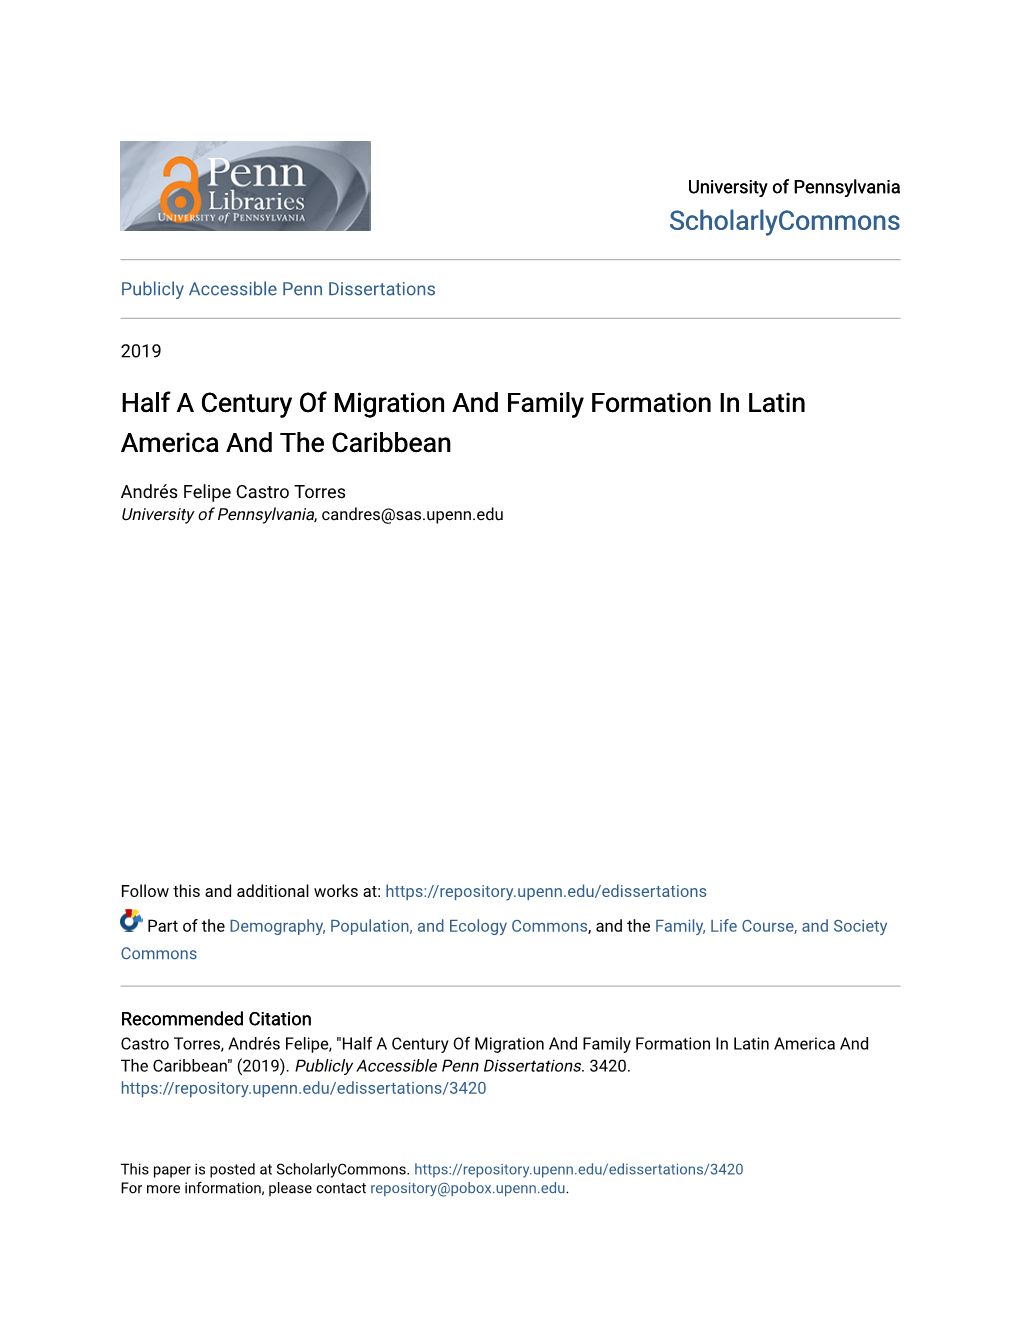 Half a Century of Migration and Family Formation in Latin America and the Caribbean